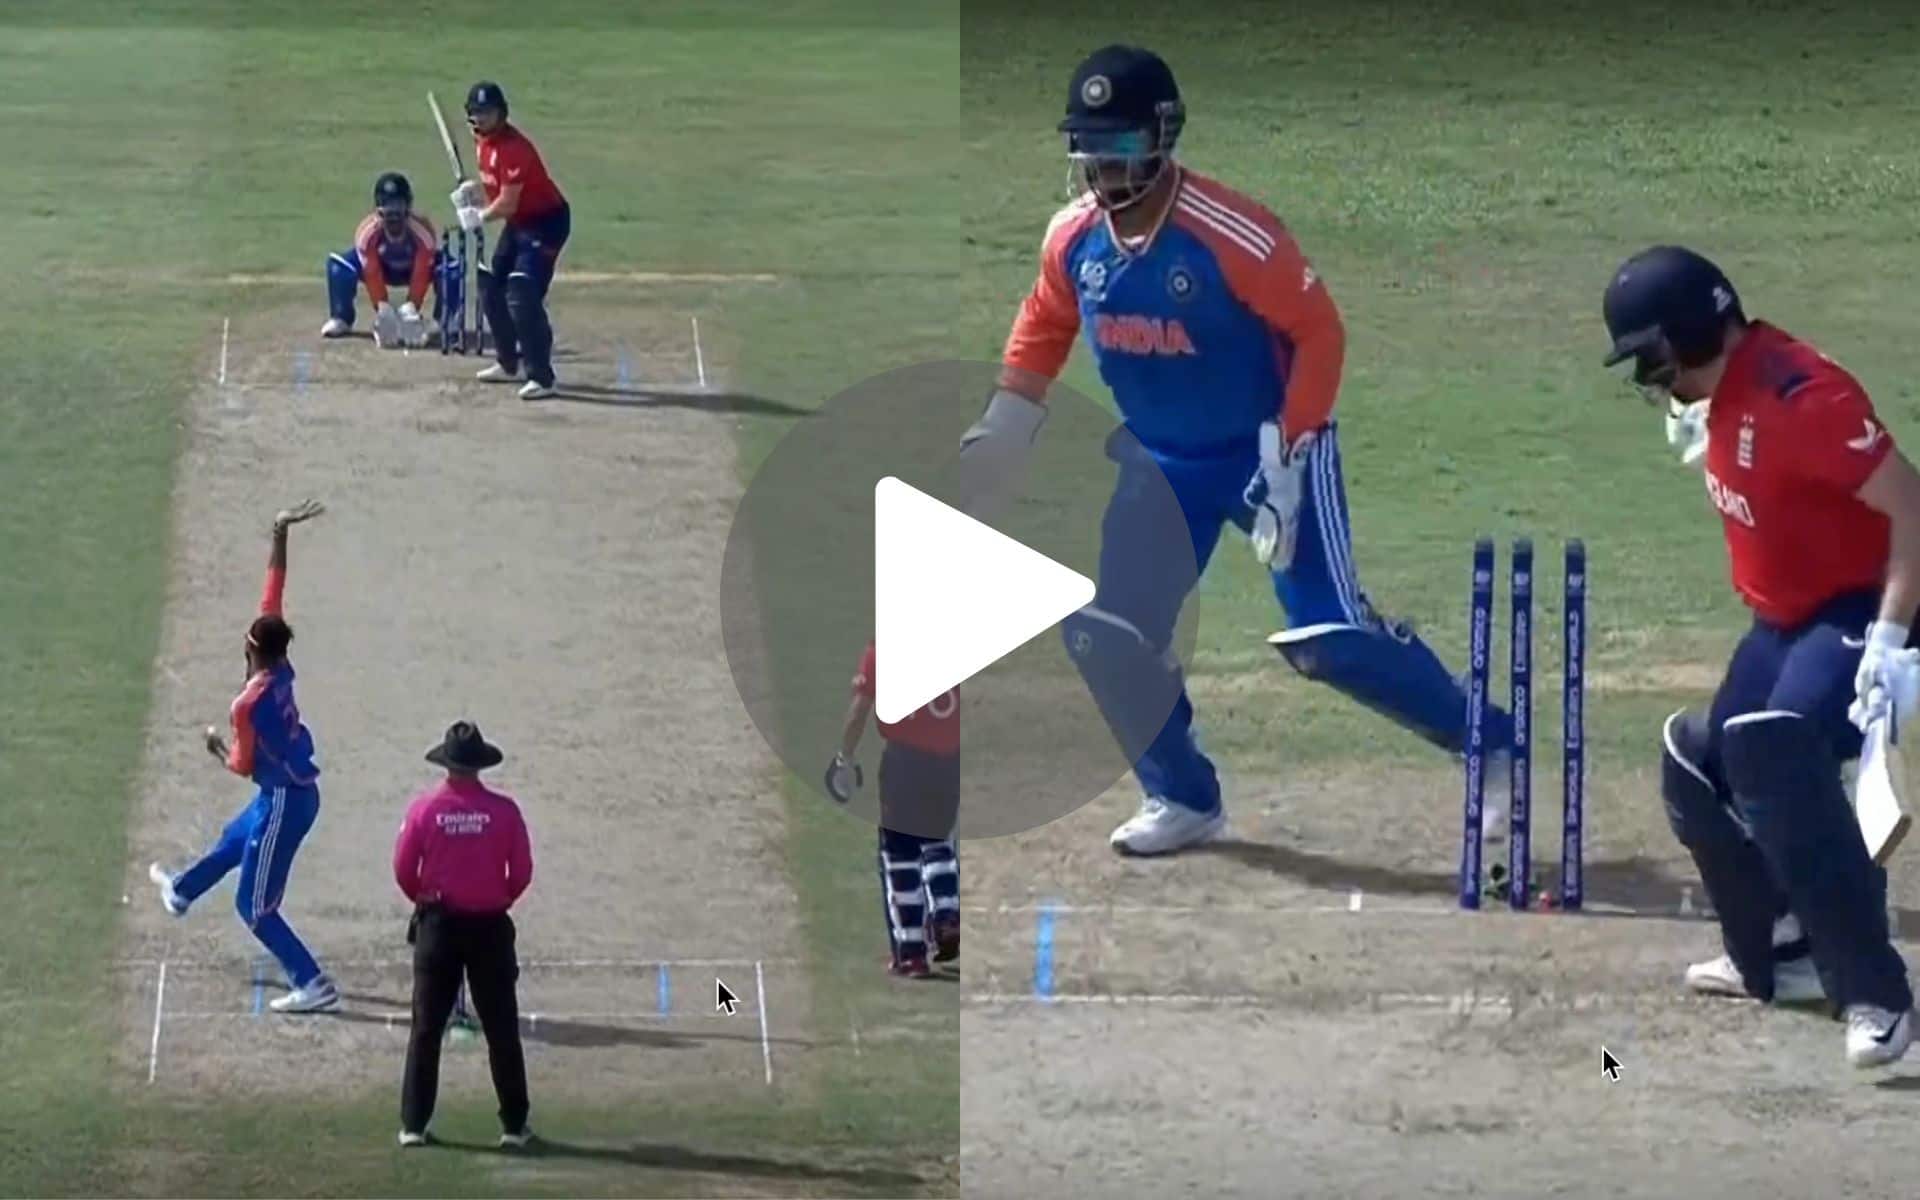 [Watch] Bairstow ‘Stunned For Duck’ As Axar Patel’s Golden Arm Tears England Apart